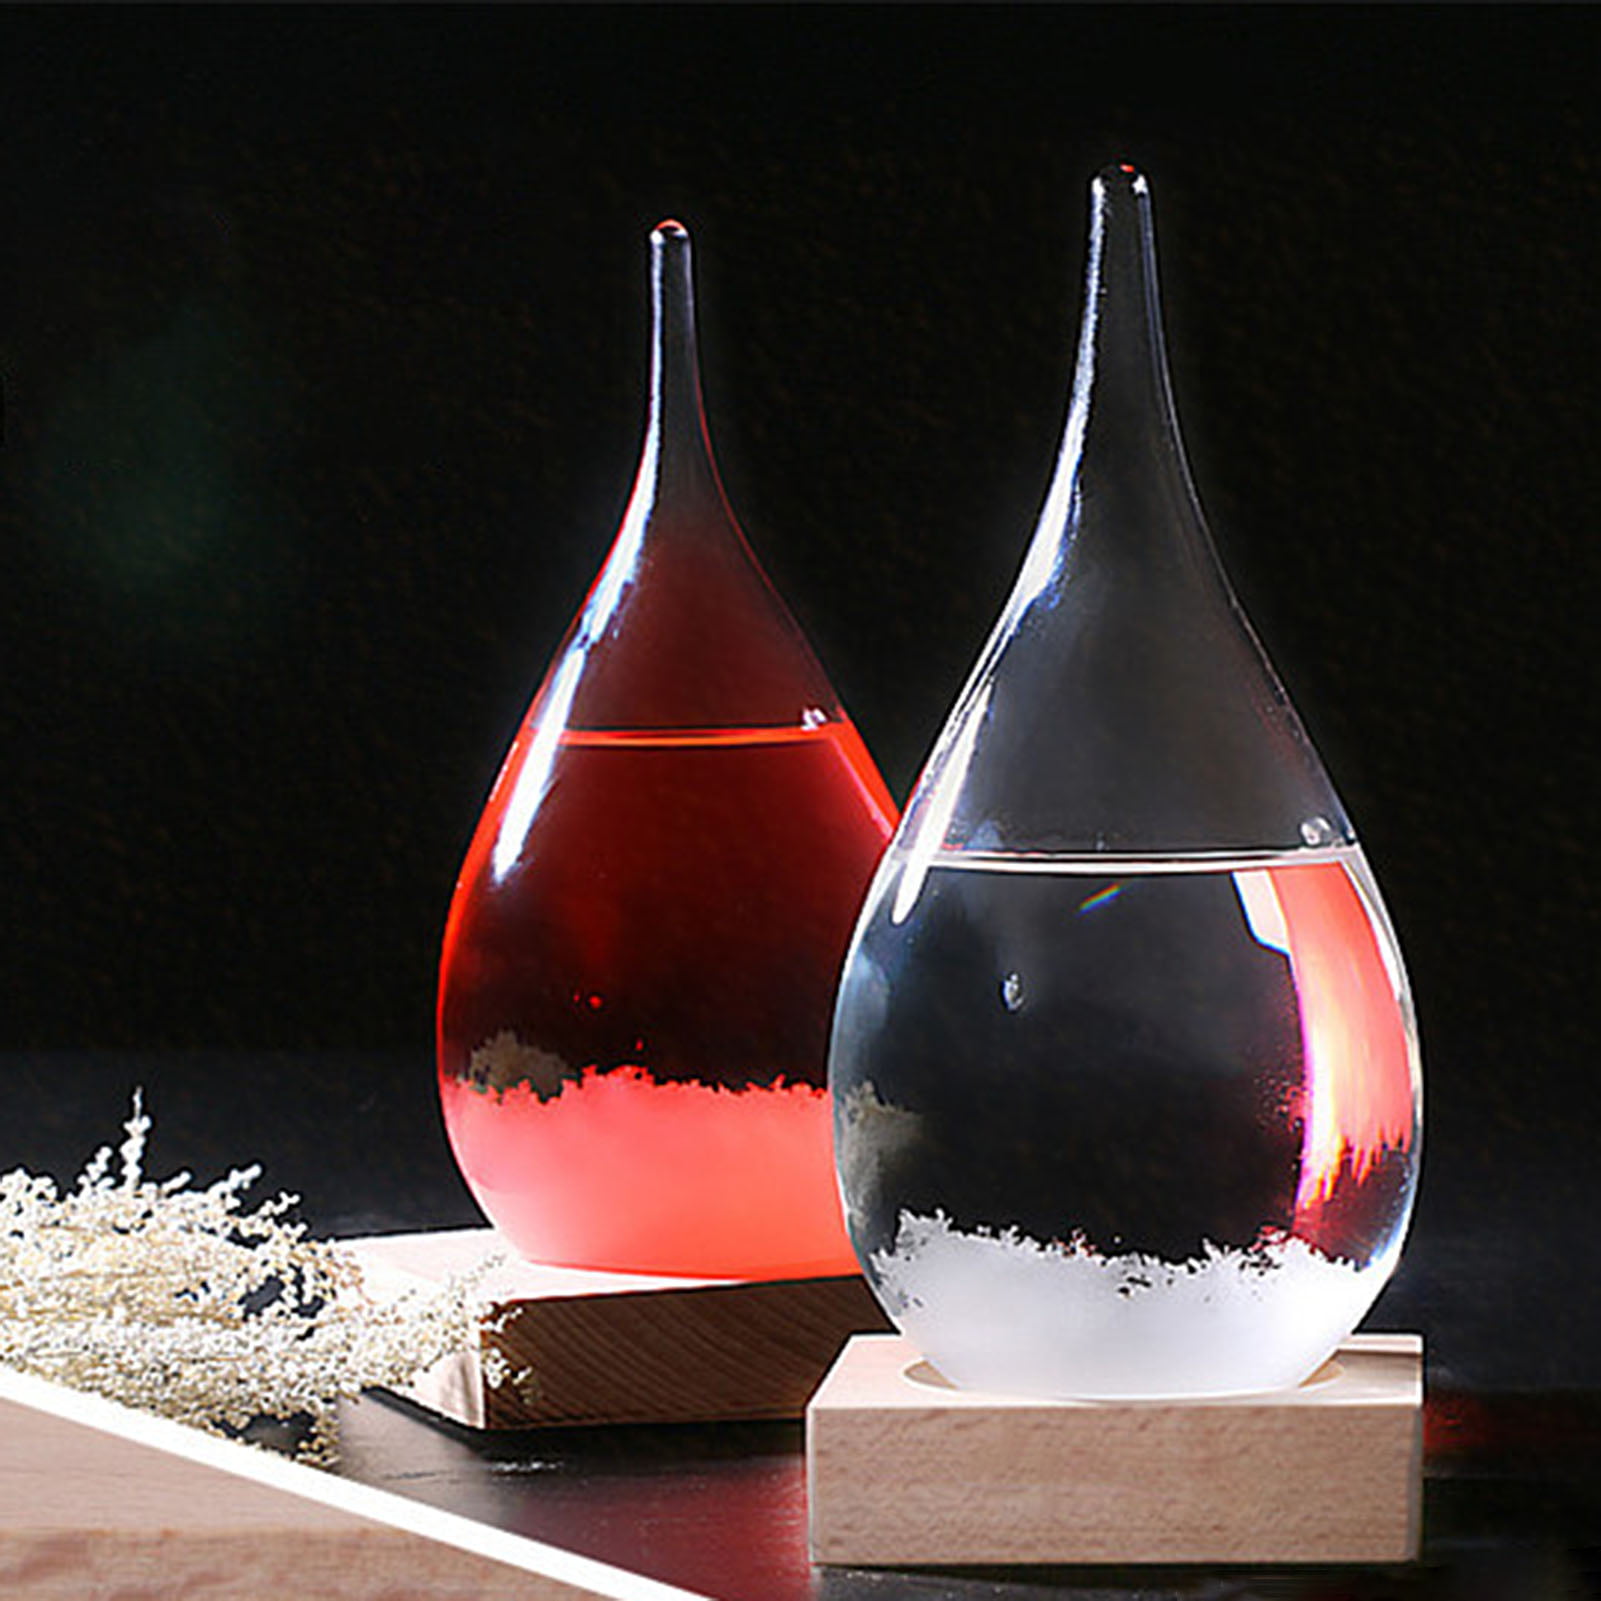 GM GMISS Storm Glass Weather Forecaster Weather Station Fashion Creative Office Desktop and Home Decor Water Drop Glass Bottle 